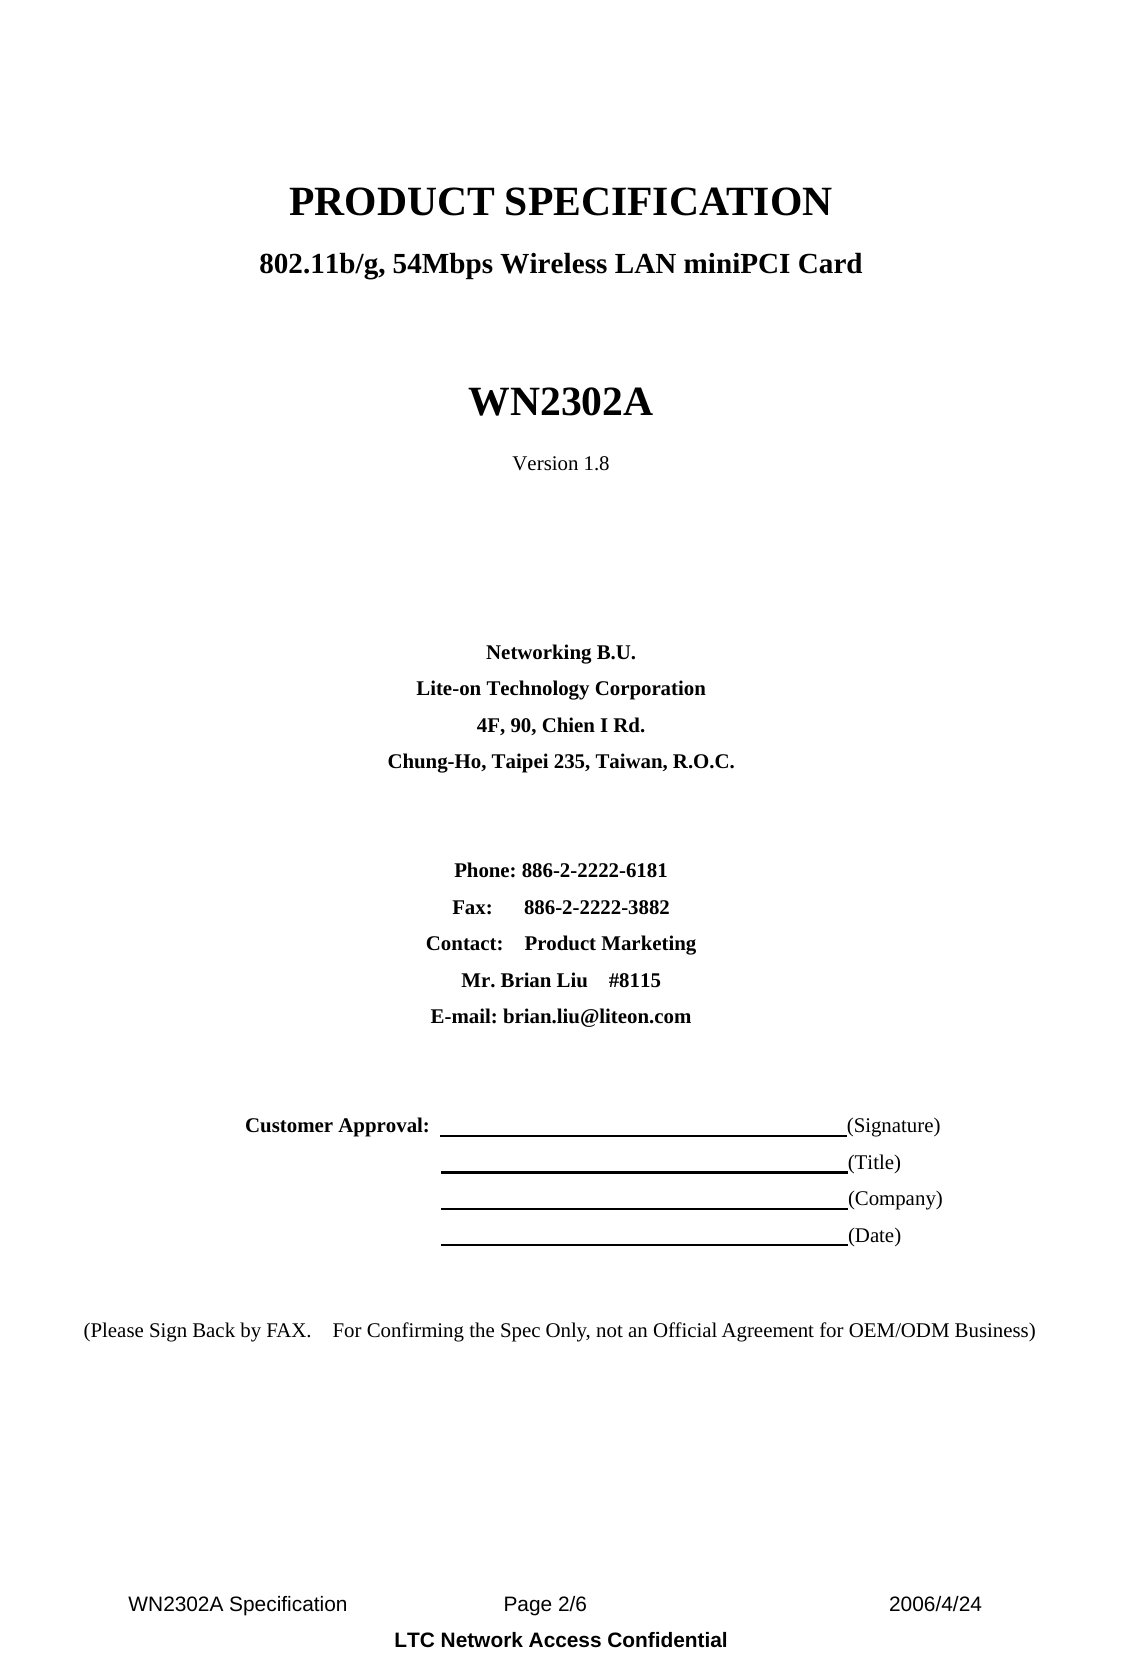  WN2302A Specification               Page 2/6                             2006/4/24 LTC Network Access Confidential  PRODUCT SPECIFICATION 802.11b/g, 54Mbps Wireless LAN miniPCI Card  WN2302A Version 1.8     Networking B.U. Lite-on Technology Corporation 4F, 90, Chien I Rd. Chung-Ho, Taipei 235, Taiwan, R.O.C.   Phone: 886-2-2222-6181 Fax:   886-2-2222-3882 Contact:  Product Marketing Mr. Brian Liu    #8115 E-mail: brian.liu@liteon.com     Customer Approval:                                        (Signature)                                                                      (Title)                                                                      (Company)                                                                      (Date)   (Please Sign Back by FAX.    For Confirming the Spec Only, not an Official Agreement for OEM/ODM Business) 